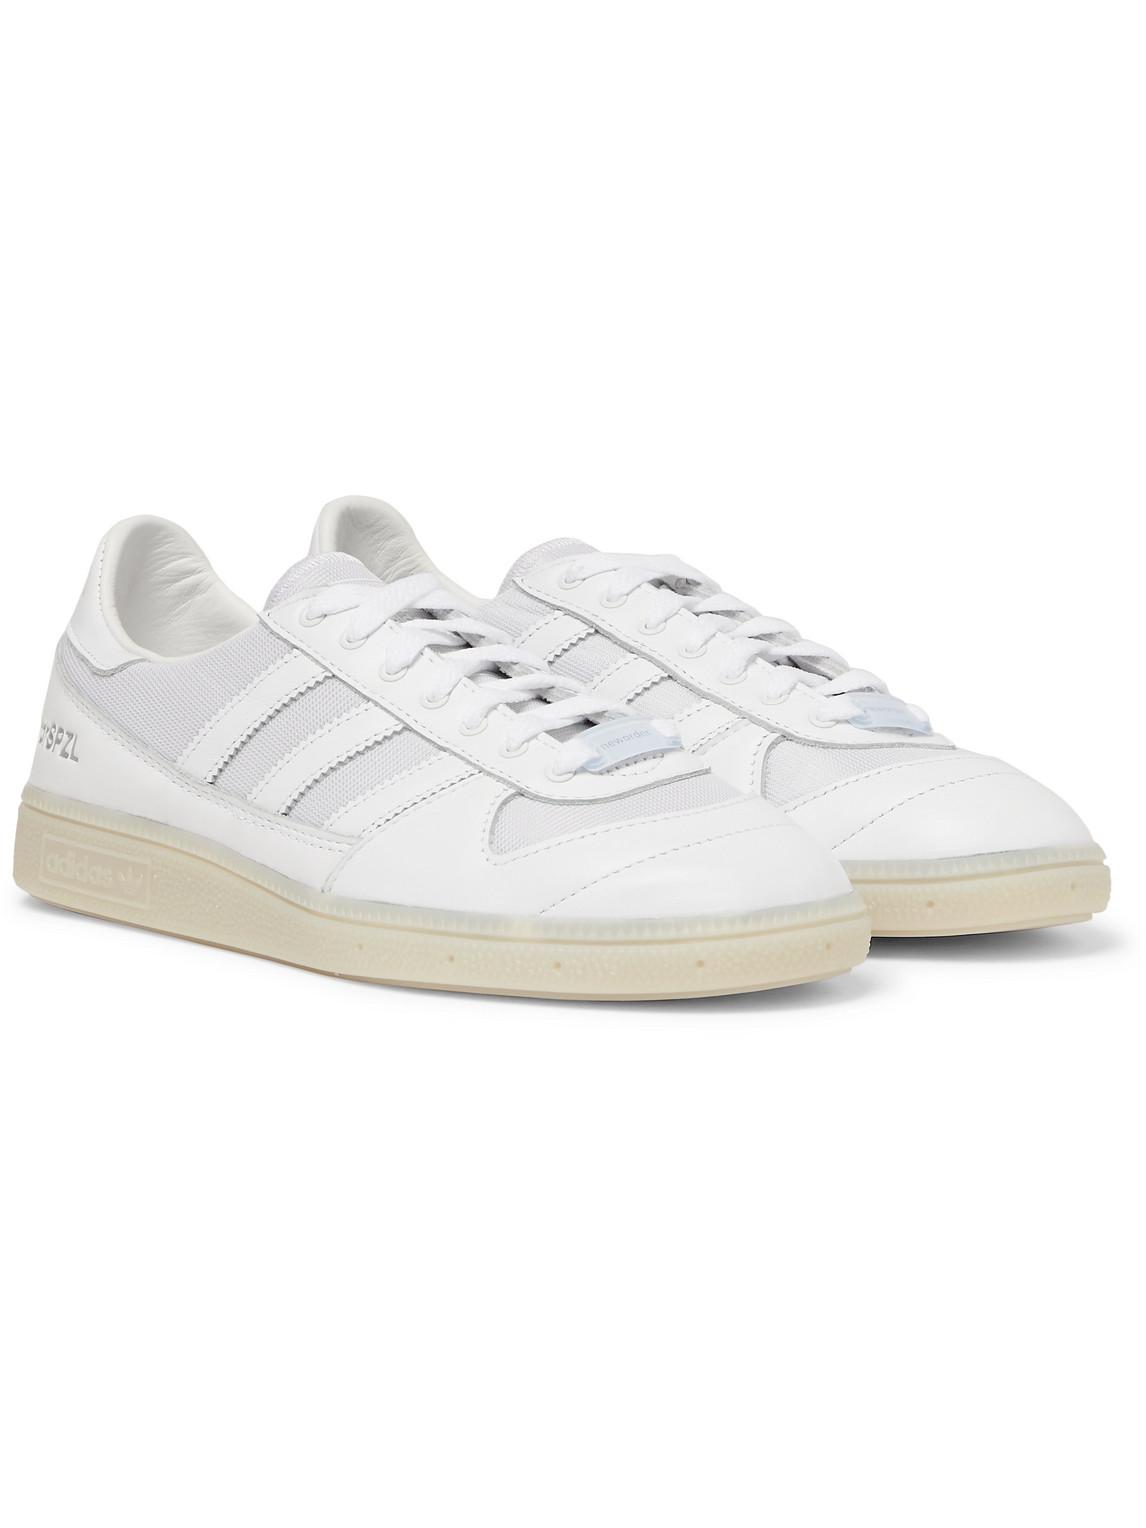 Adidas Consortium New Order Spezial Wilsy Leather And Reflective-mesh Sneakers In White